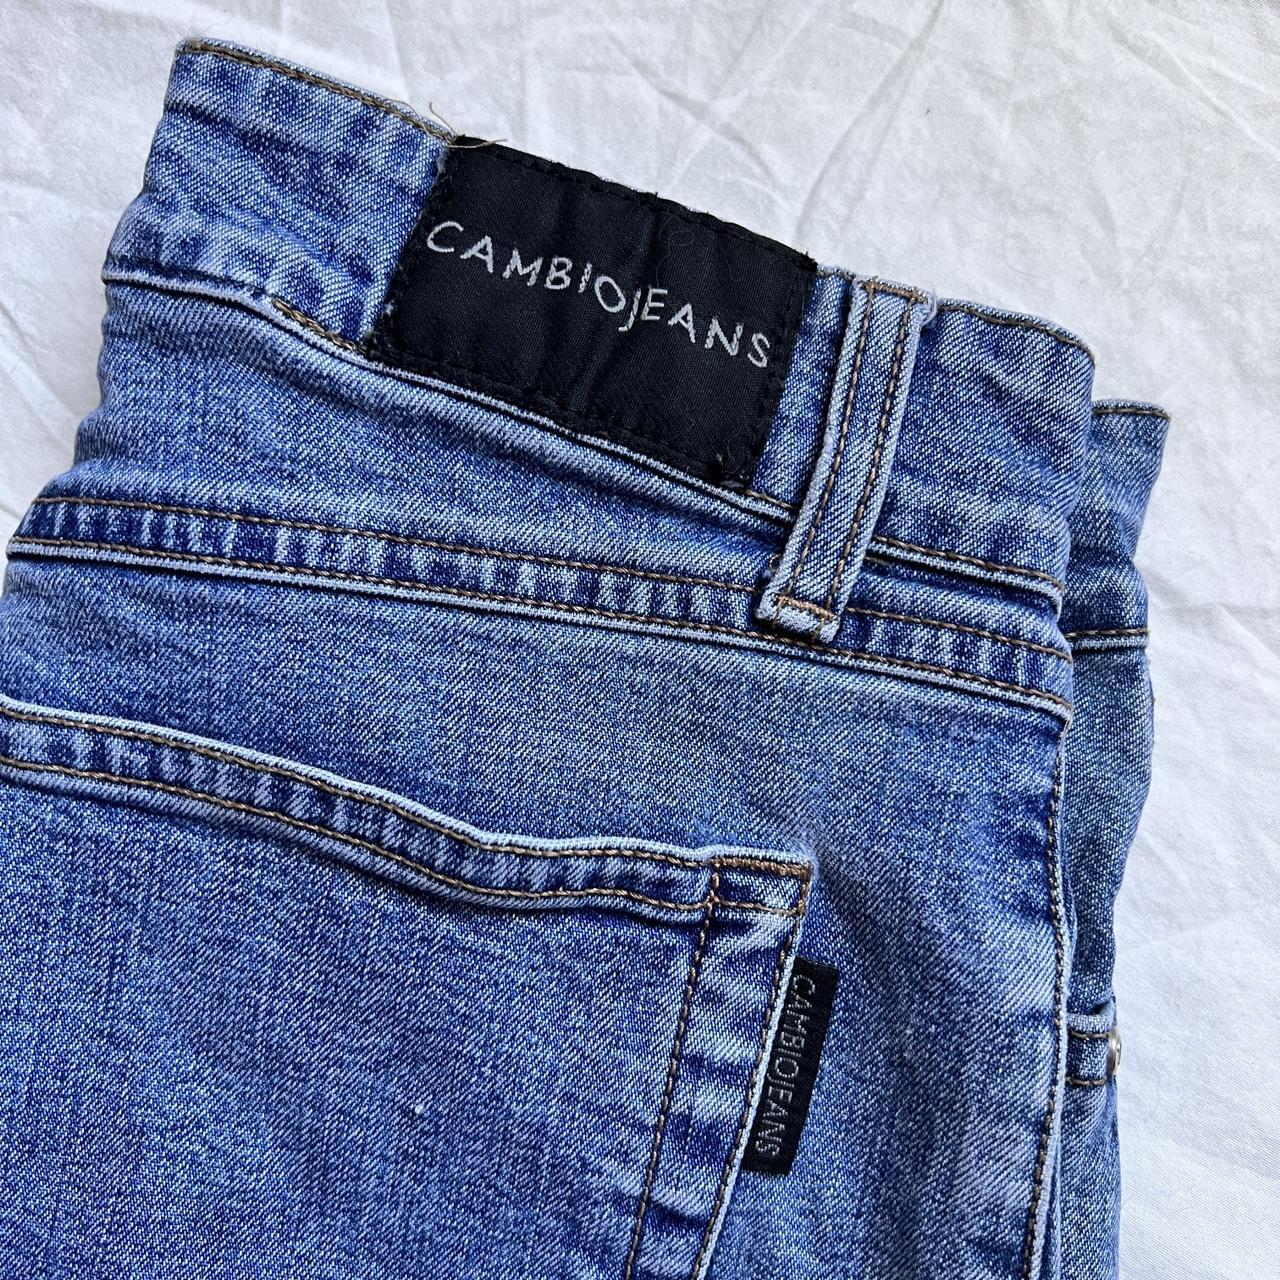 Cambio Women's Navy and Blue Jeans (2)